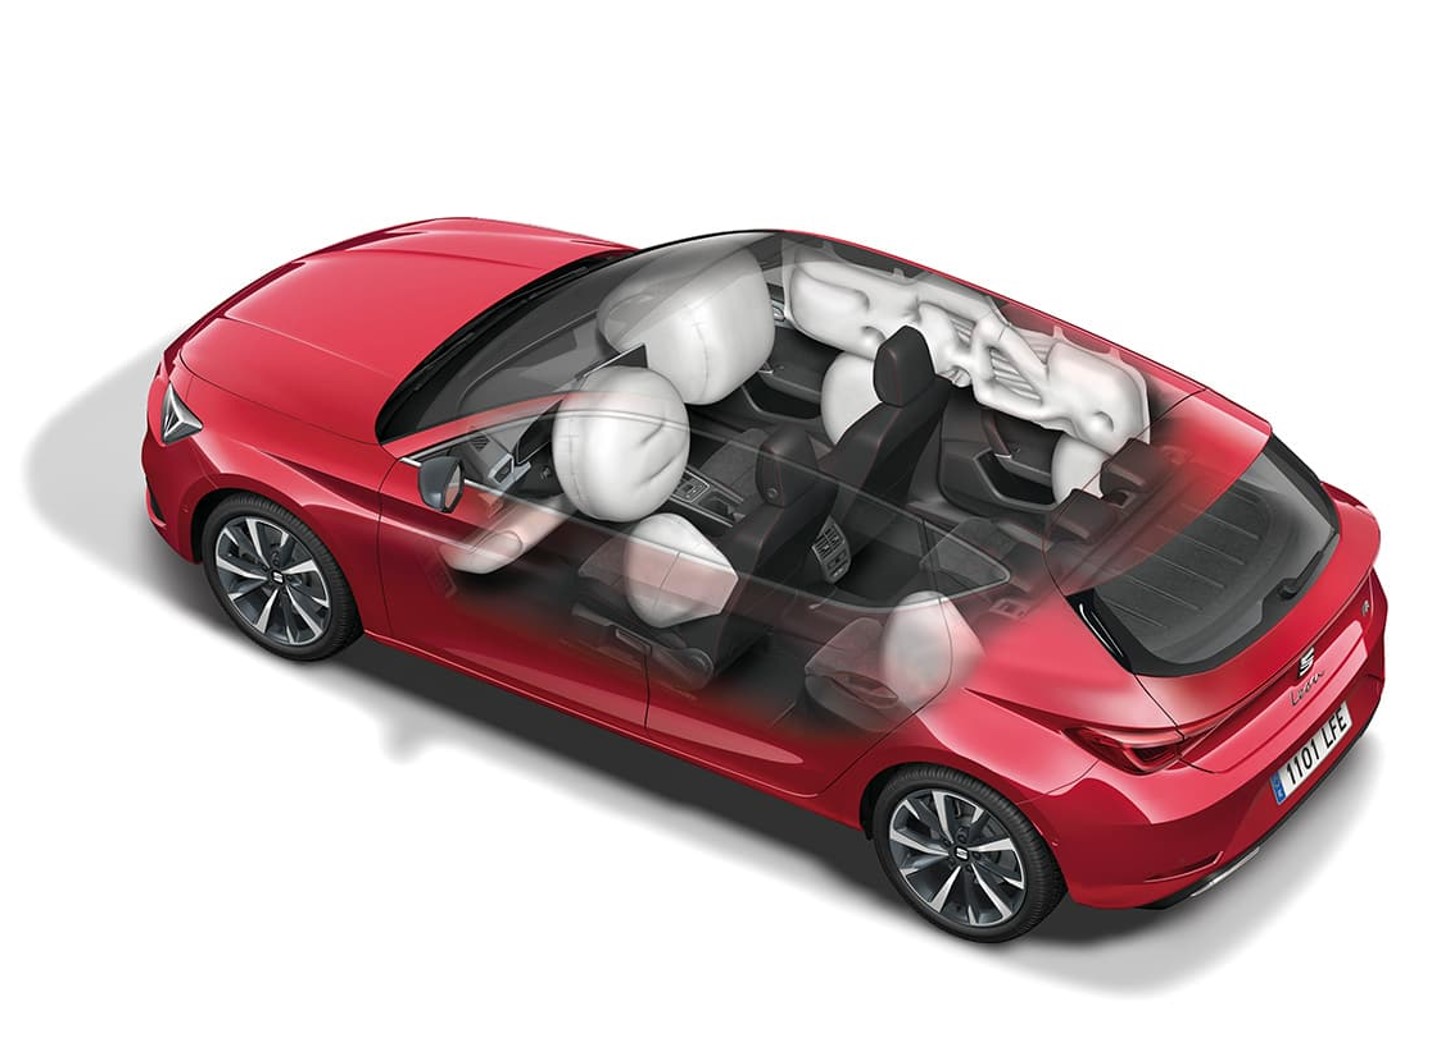 New SEAT Leon safety assistance